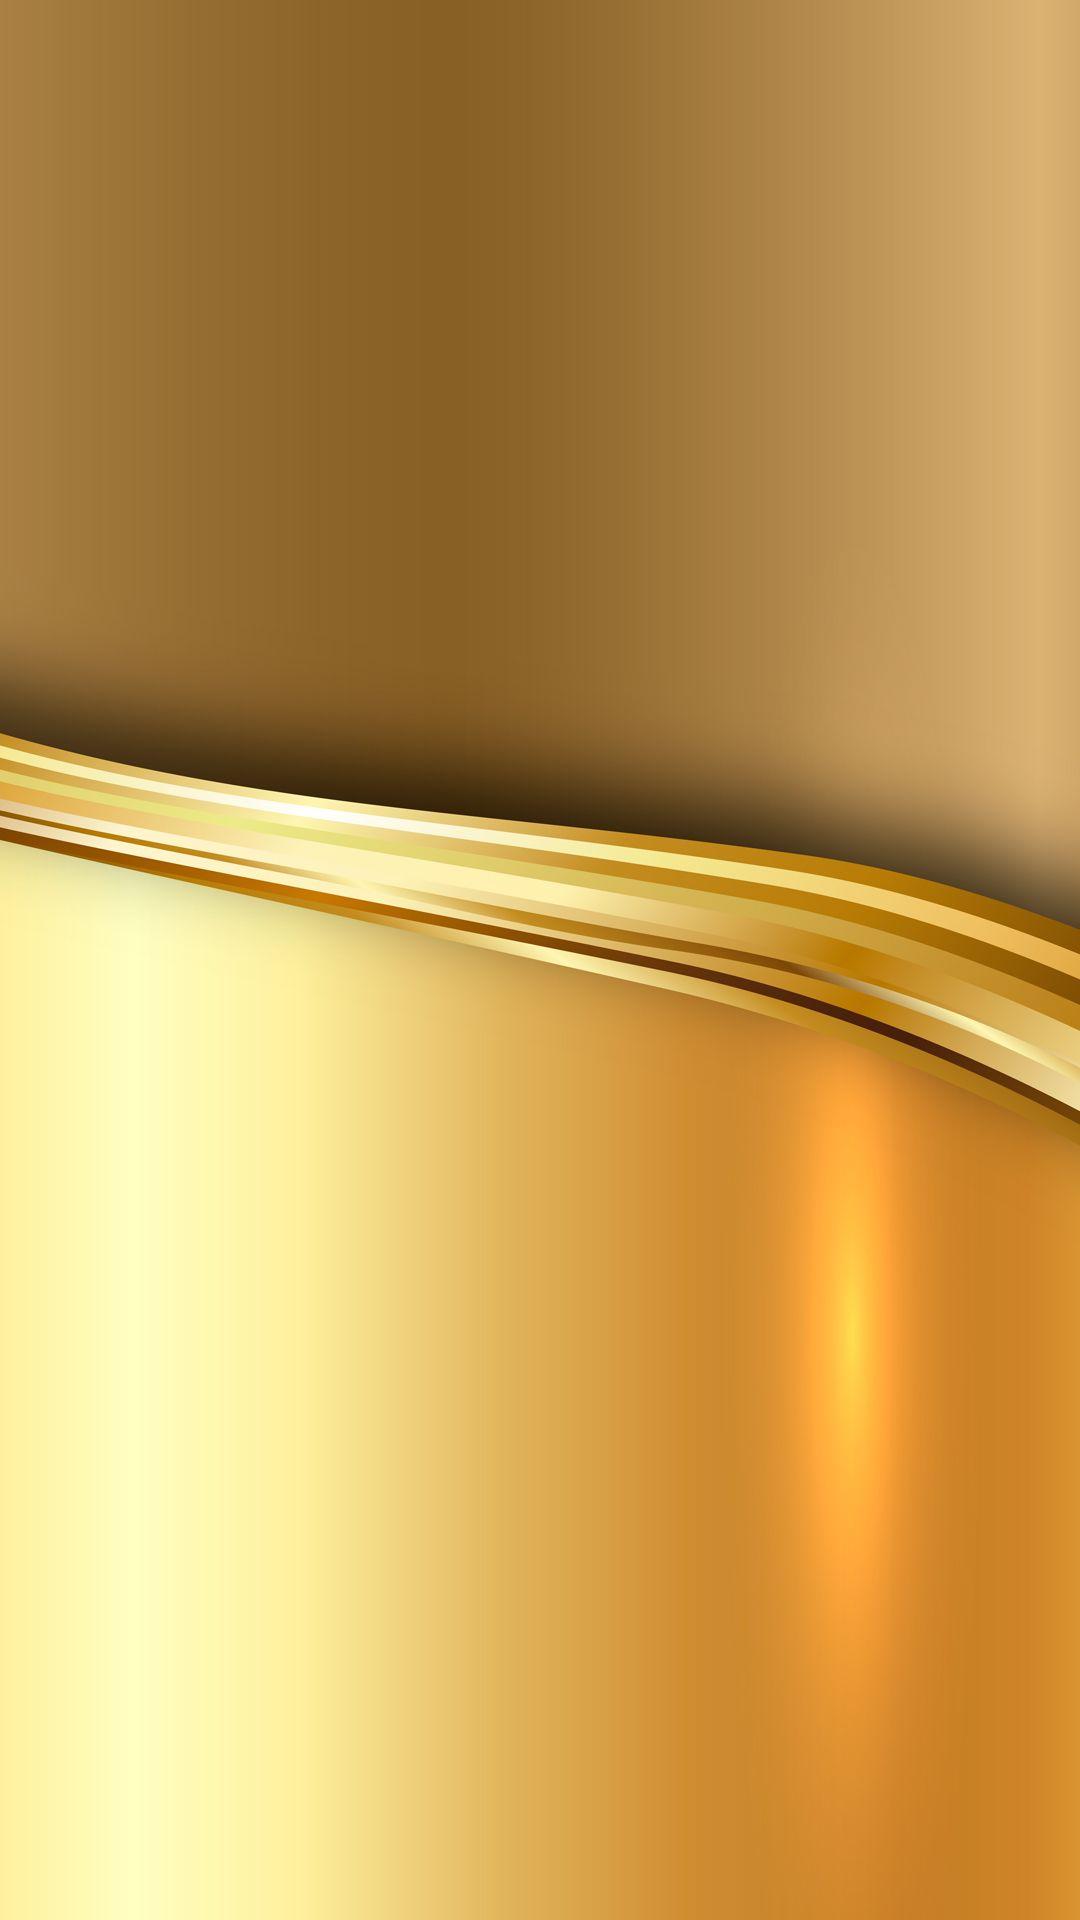 Gold Bar HD Wallpaper For Your Mobile Phone